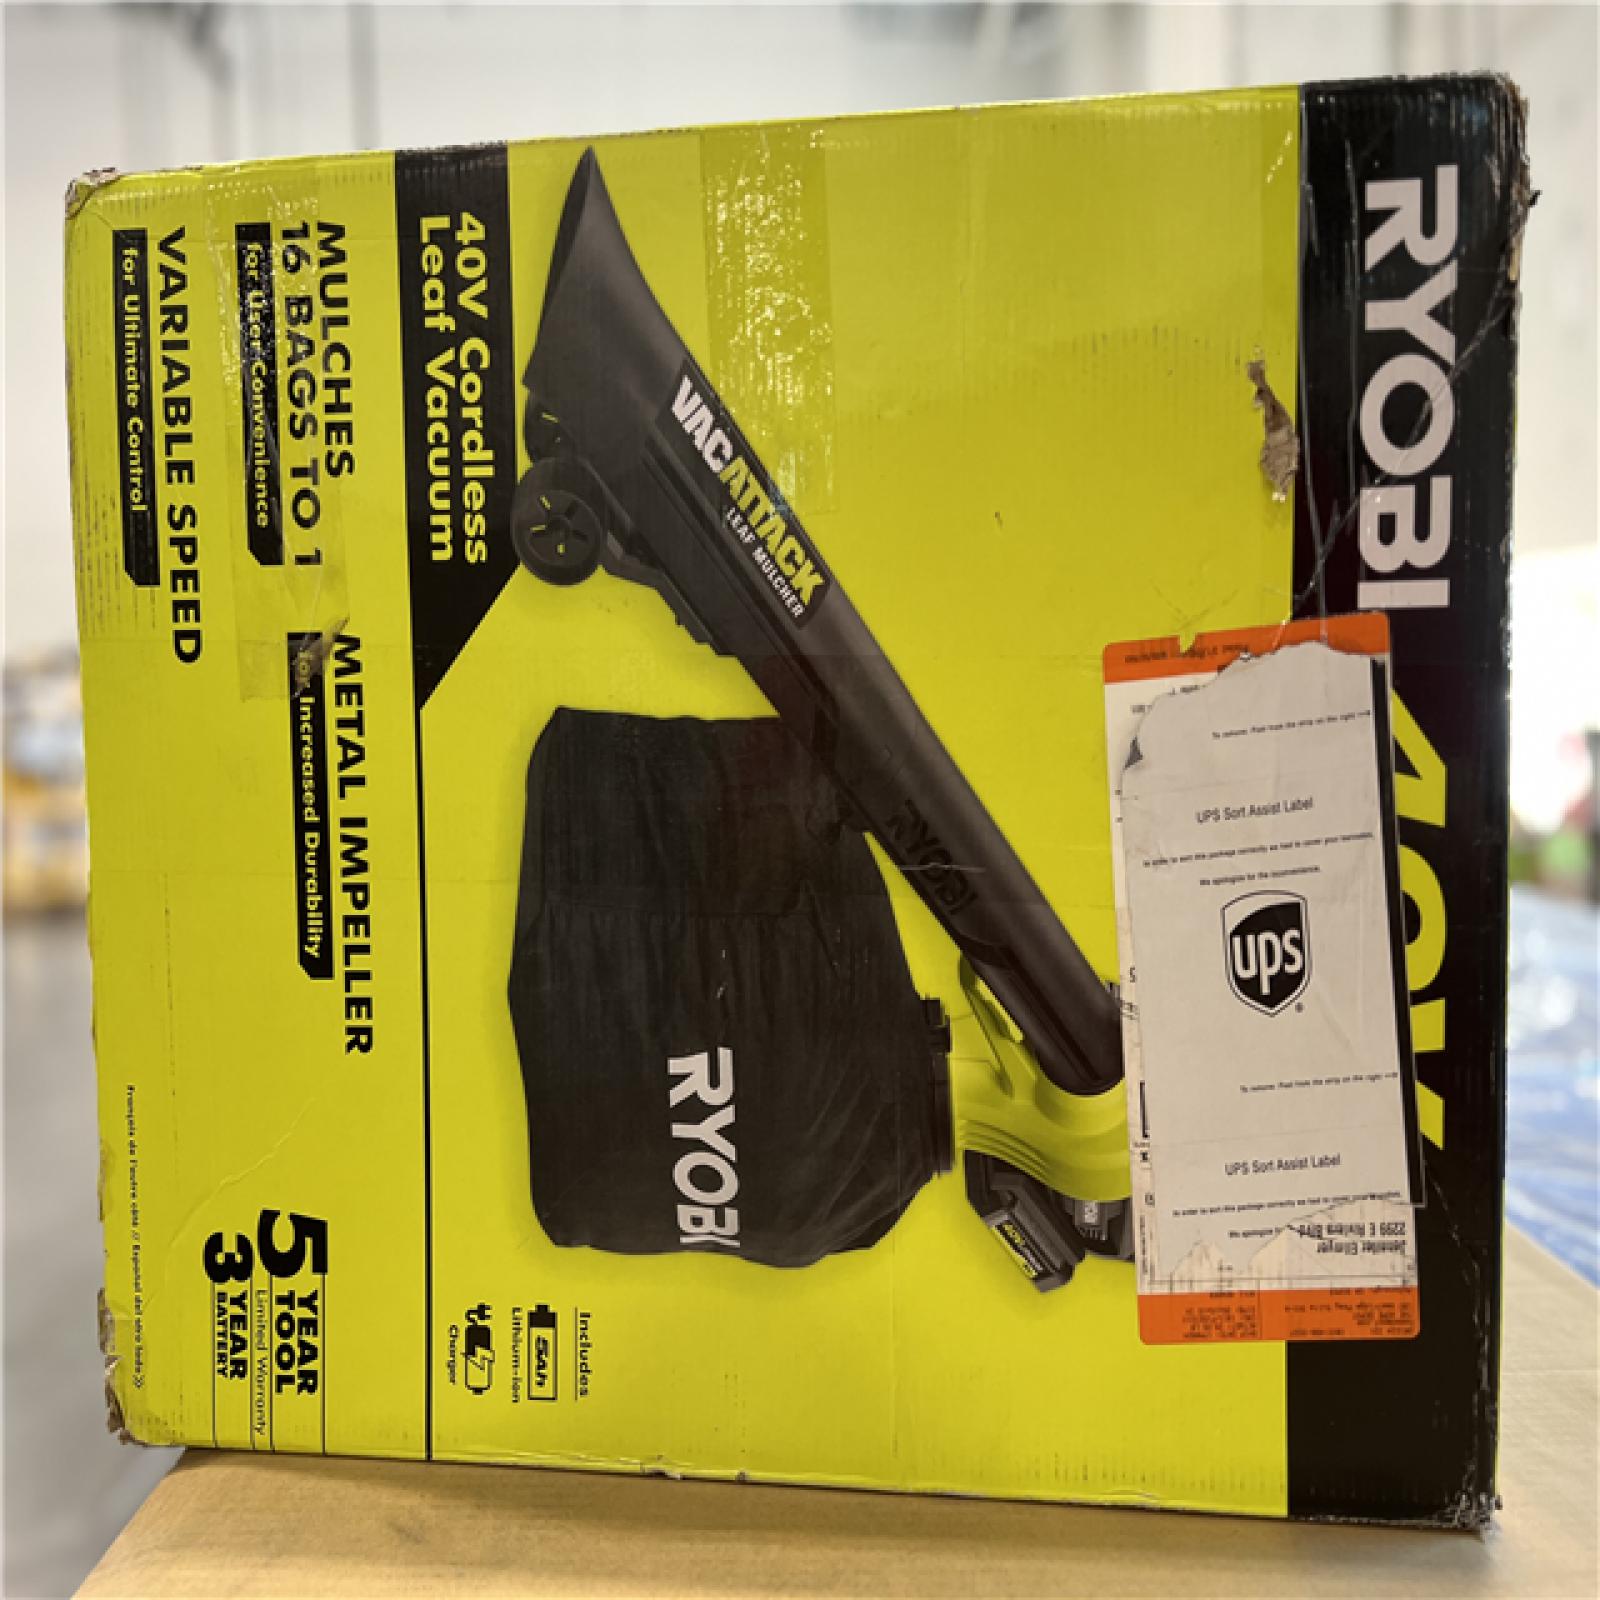 NEW! - RYOBI 40V Vac Attack Cordless Leaf Vacuum/Mulcher with 5.0 Ah Battery and Charger